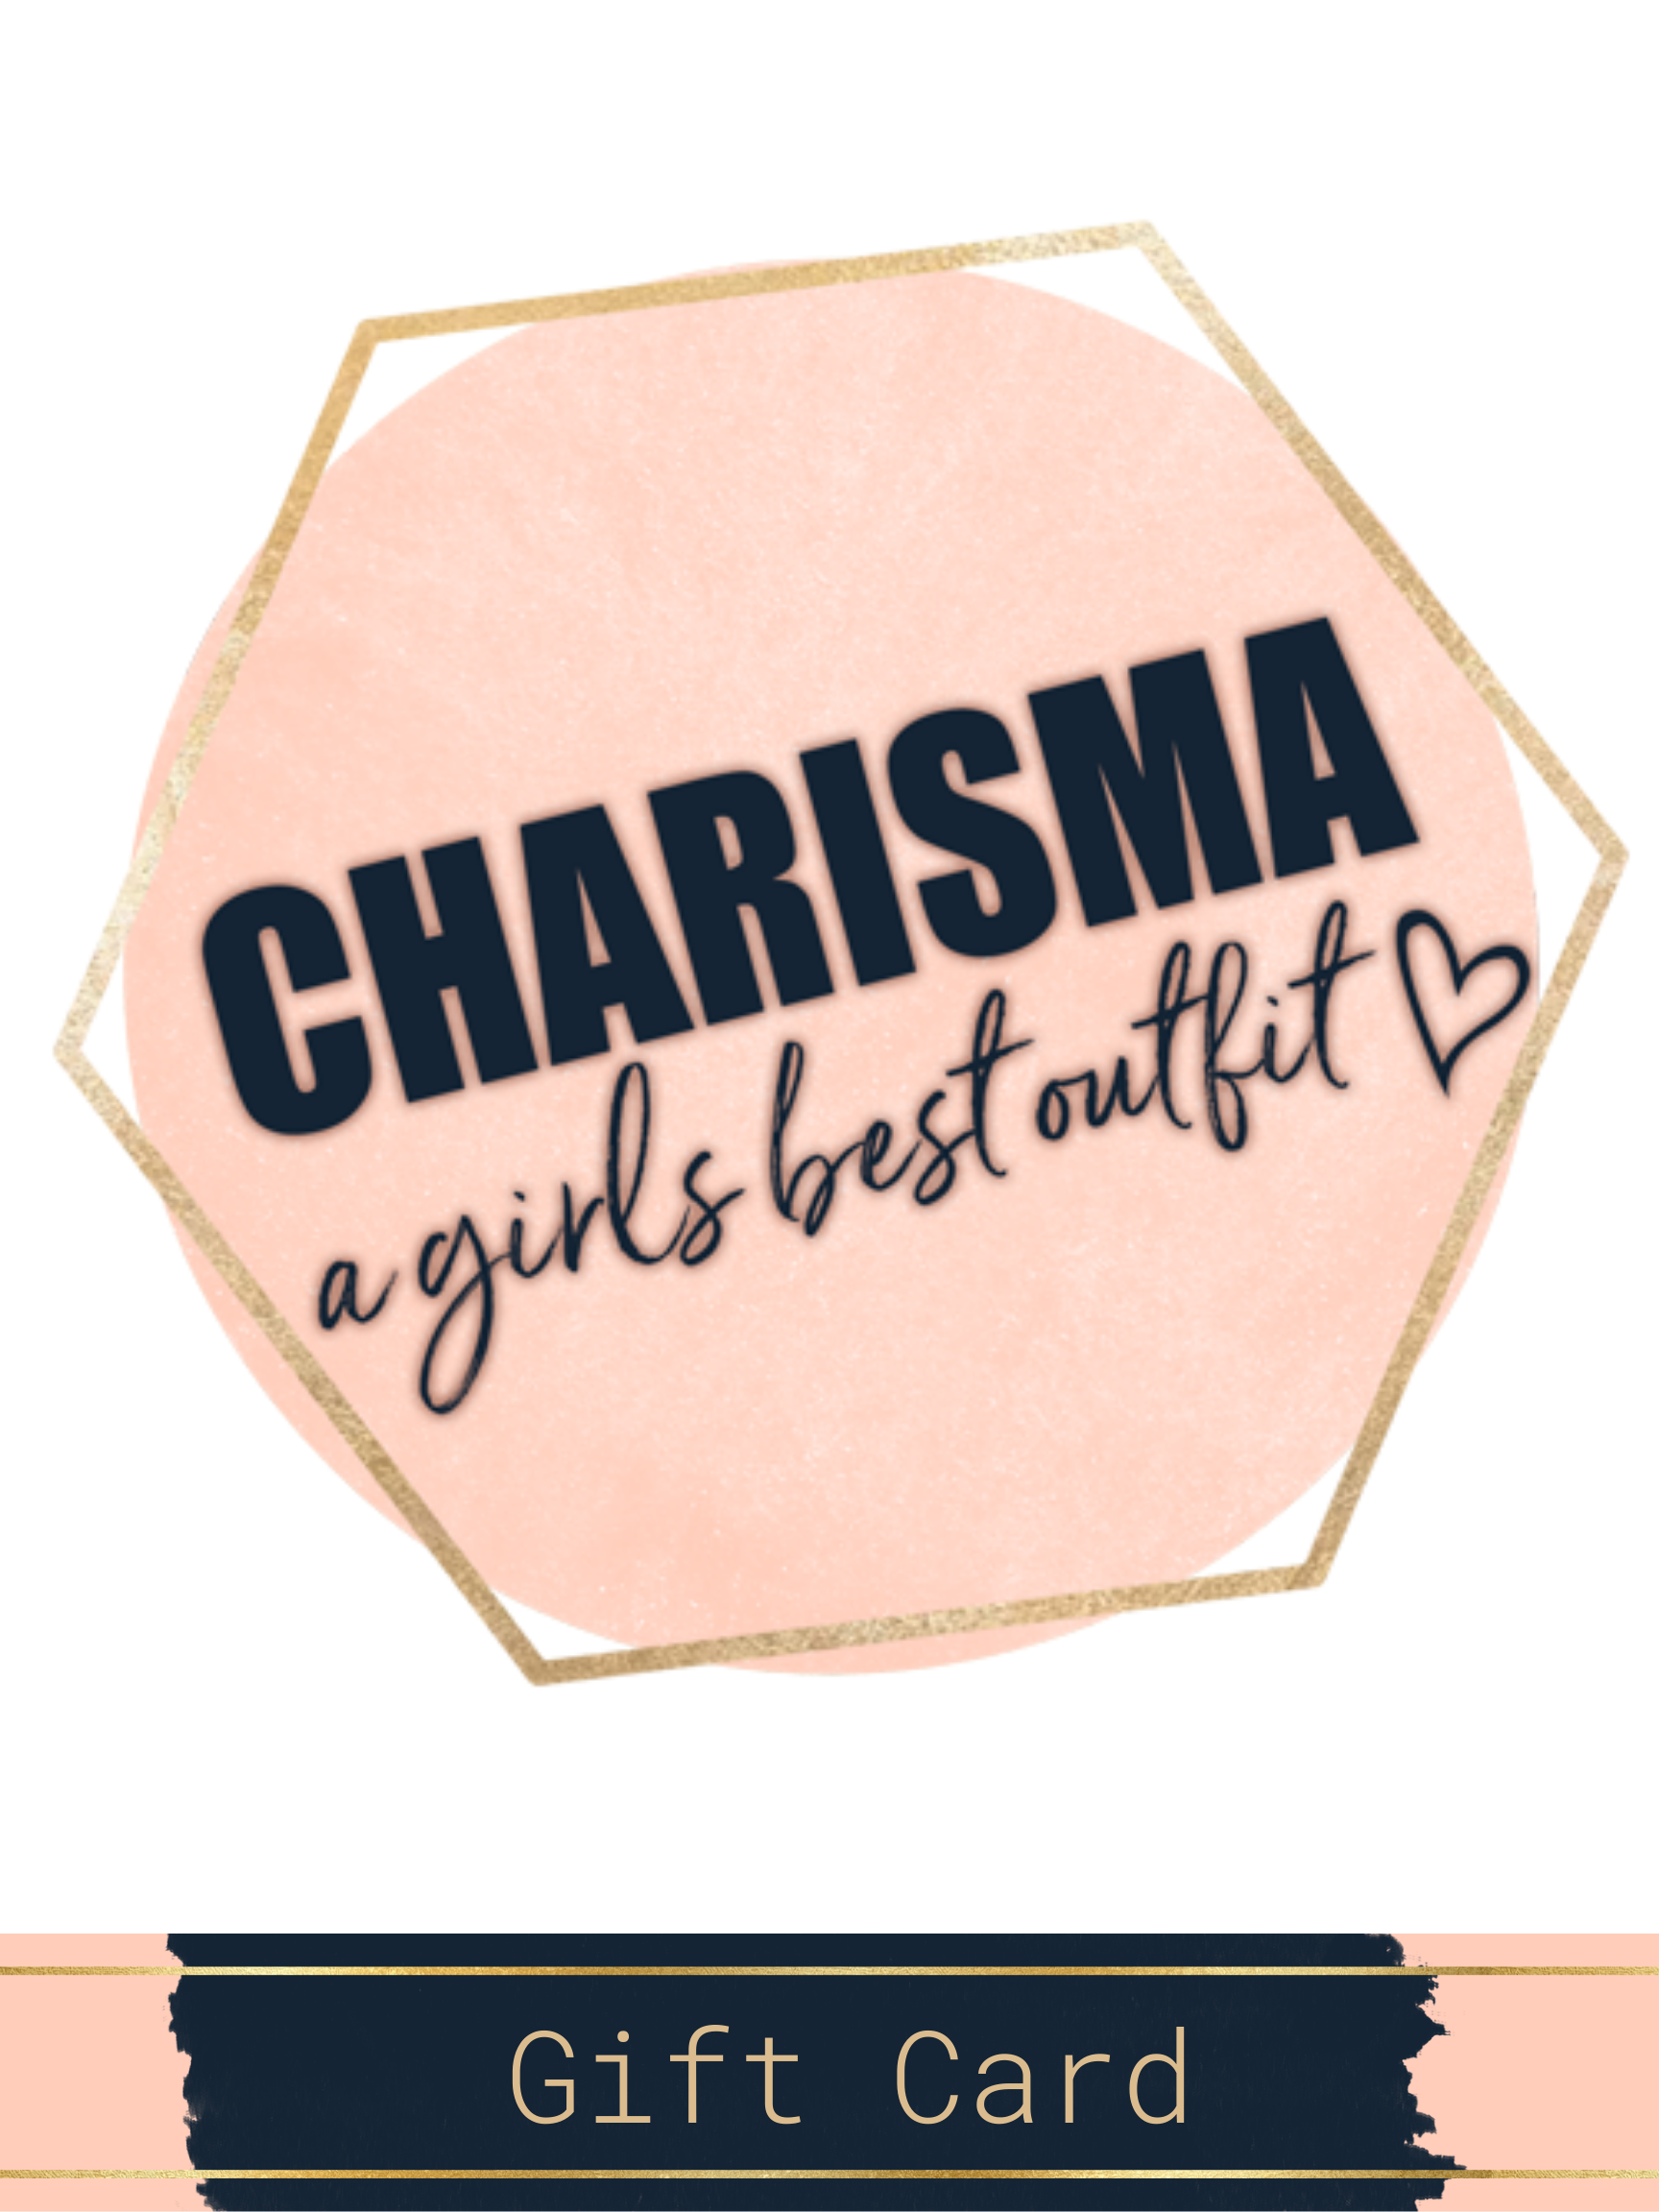 Charisma Online Giftcard